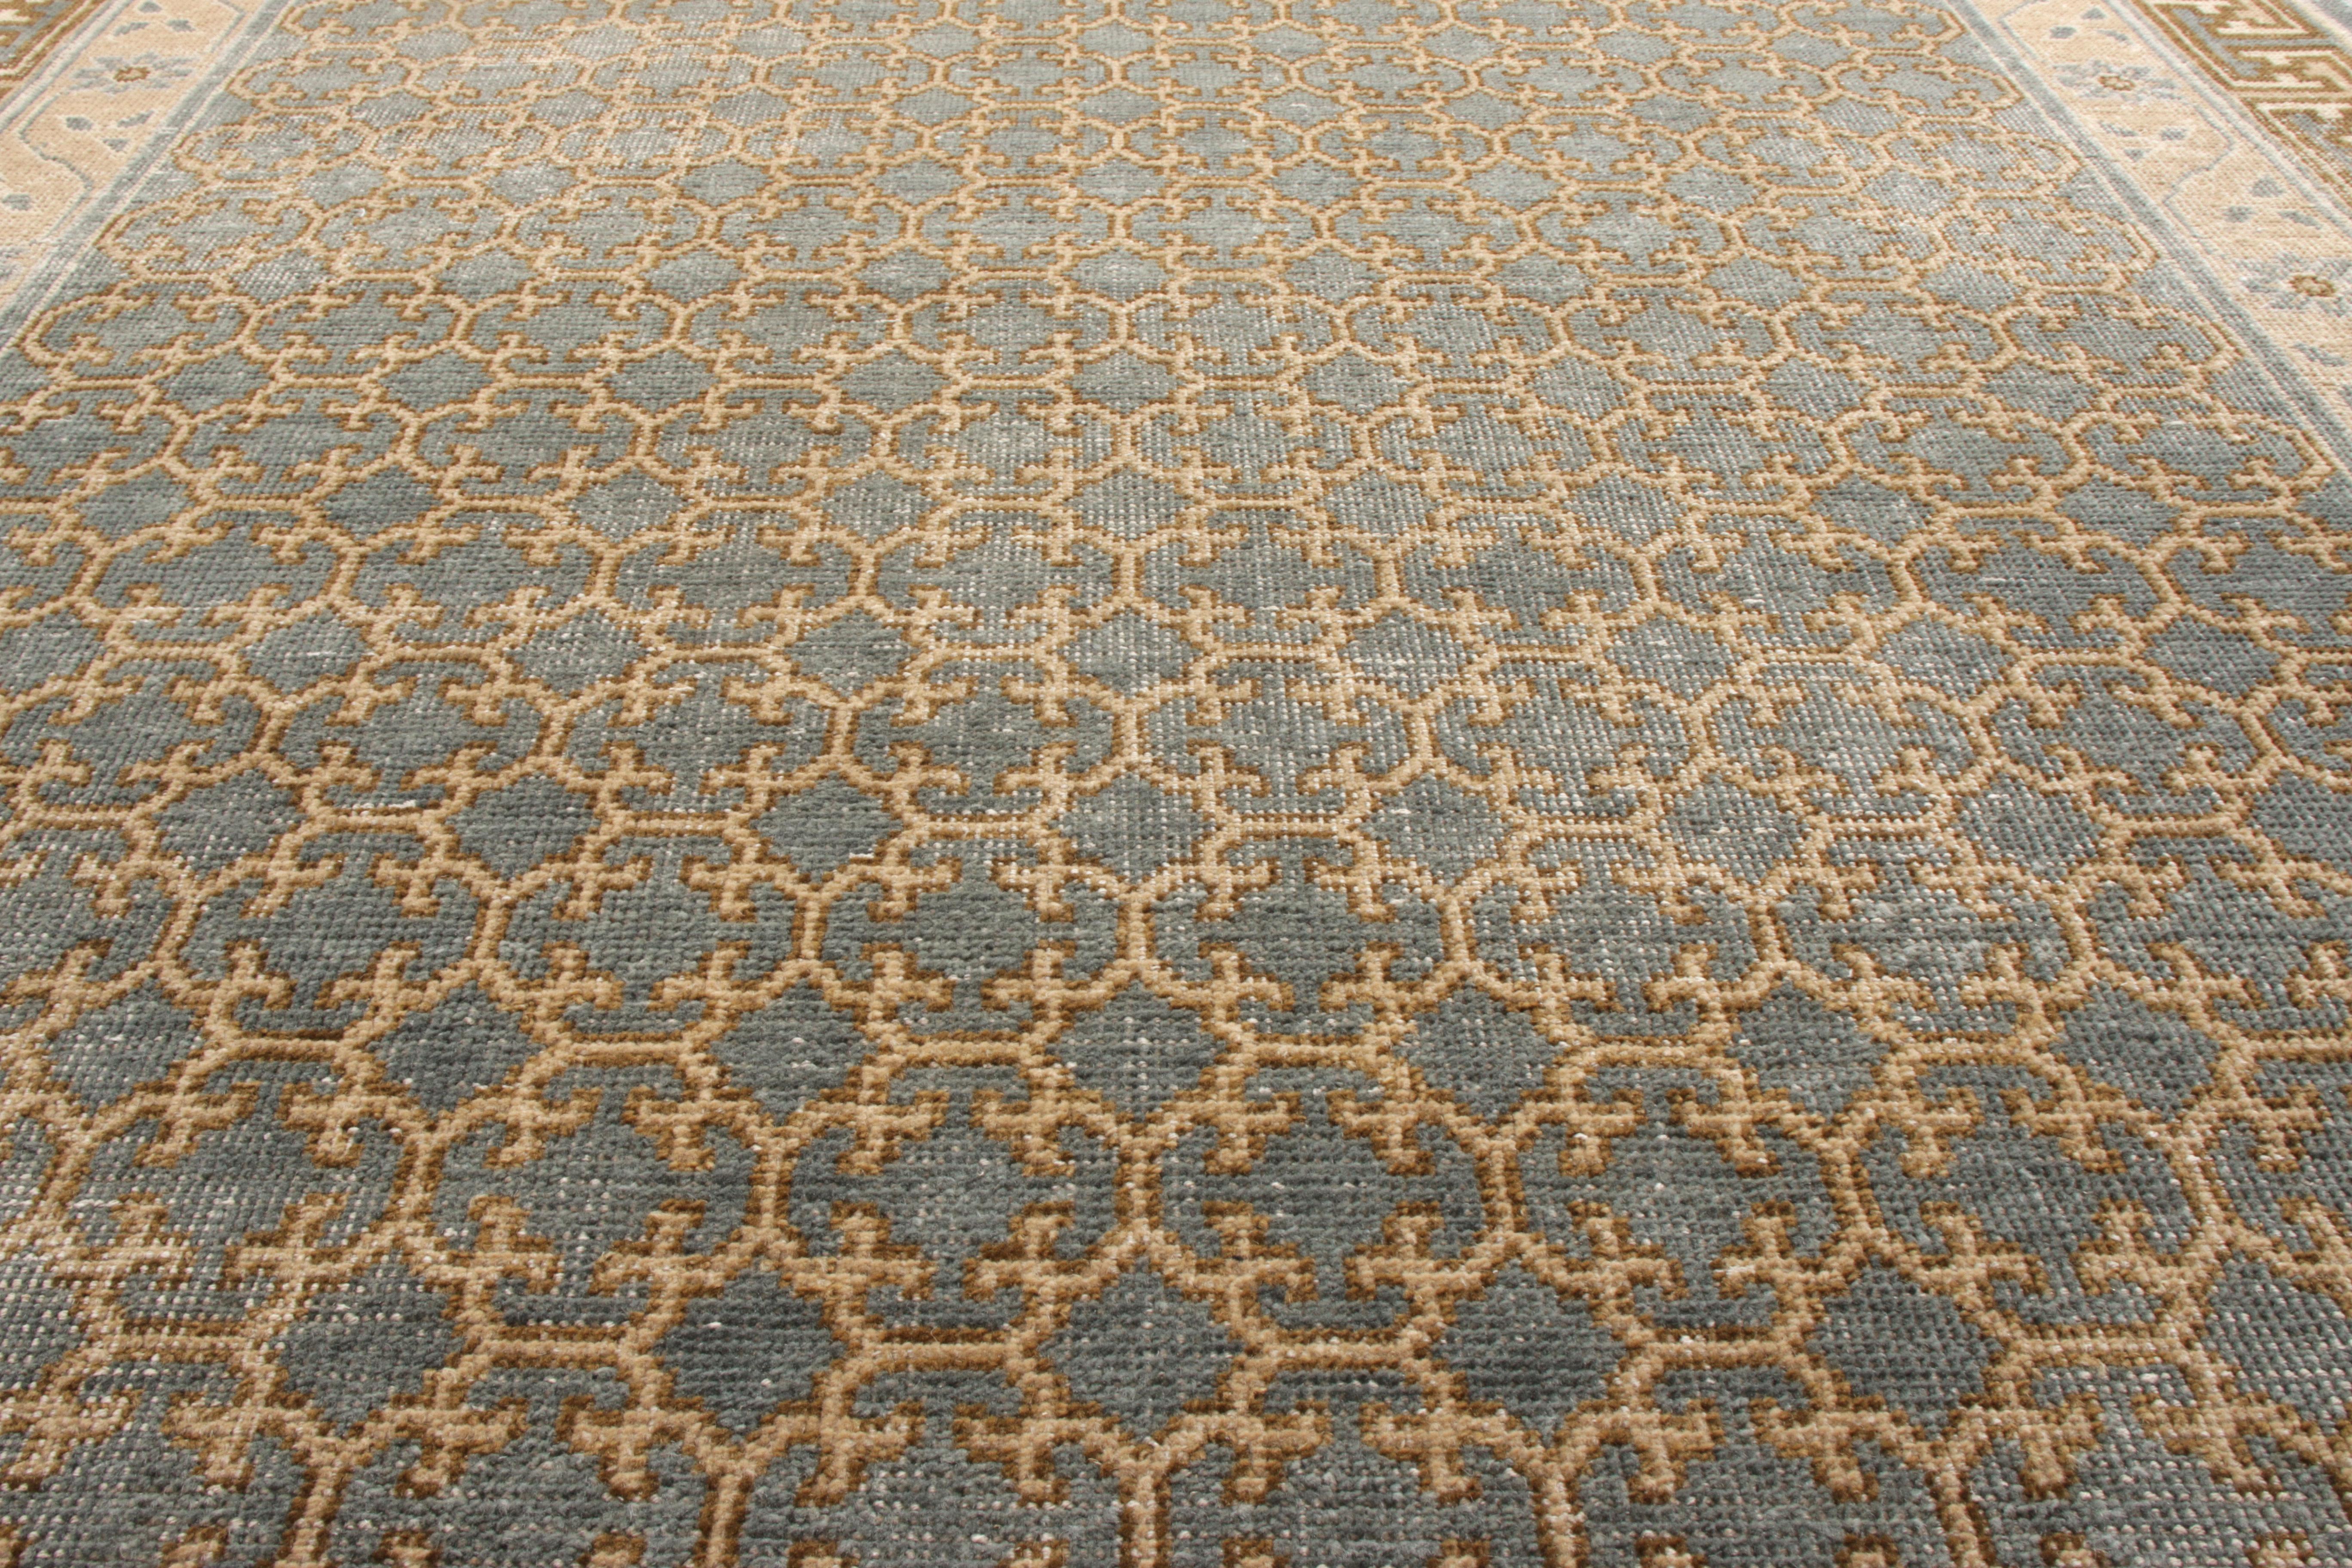 A hand-knotted wool custom rug design coming from Rug & Kilim’s Homage Collection. This 6 x 9 edition exemplified our distressed rendition of classic Khotan style where a uniform geometric pattern fills the field while being encased in a delicate